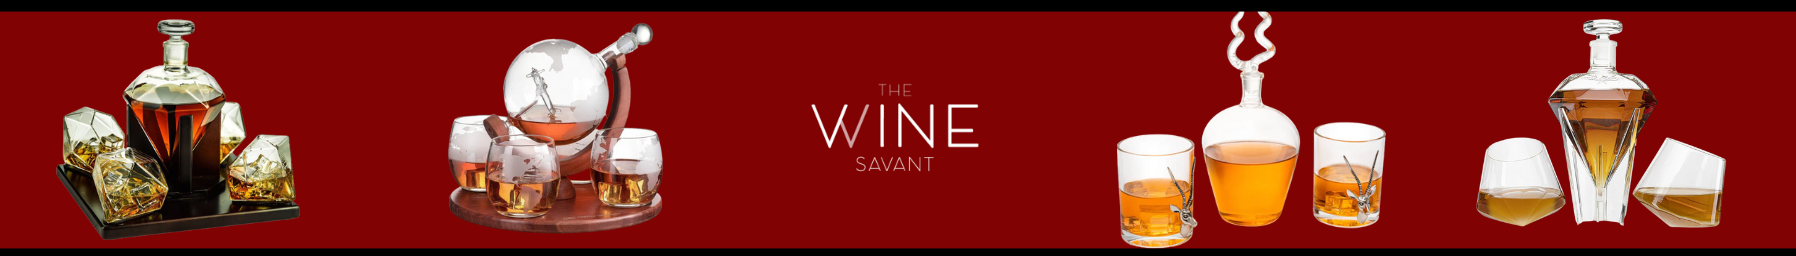 The Wine Savant - New supplier on Syncee Marketplace 